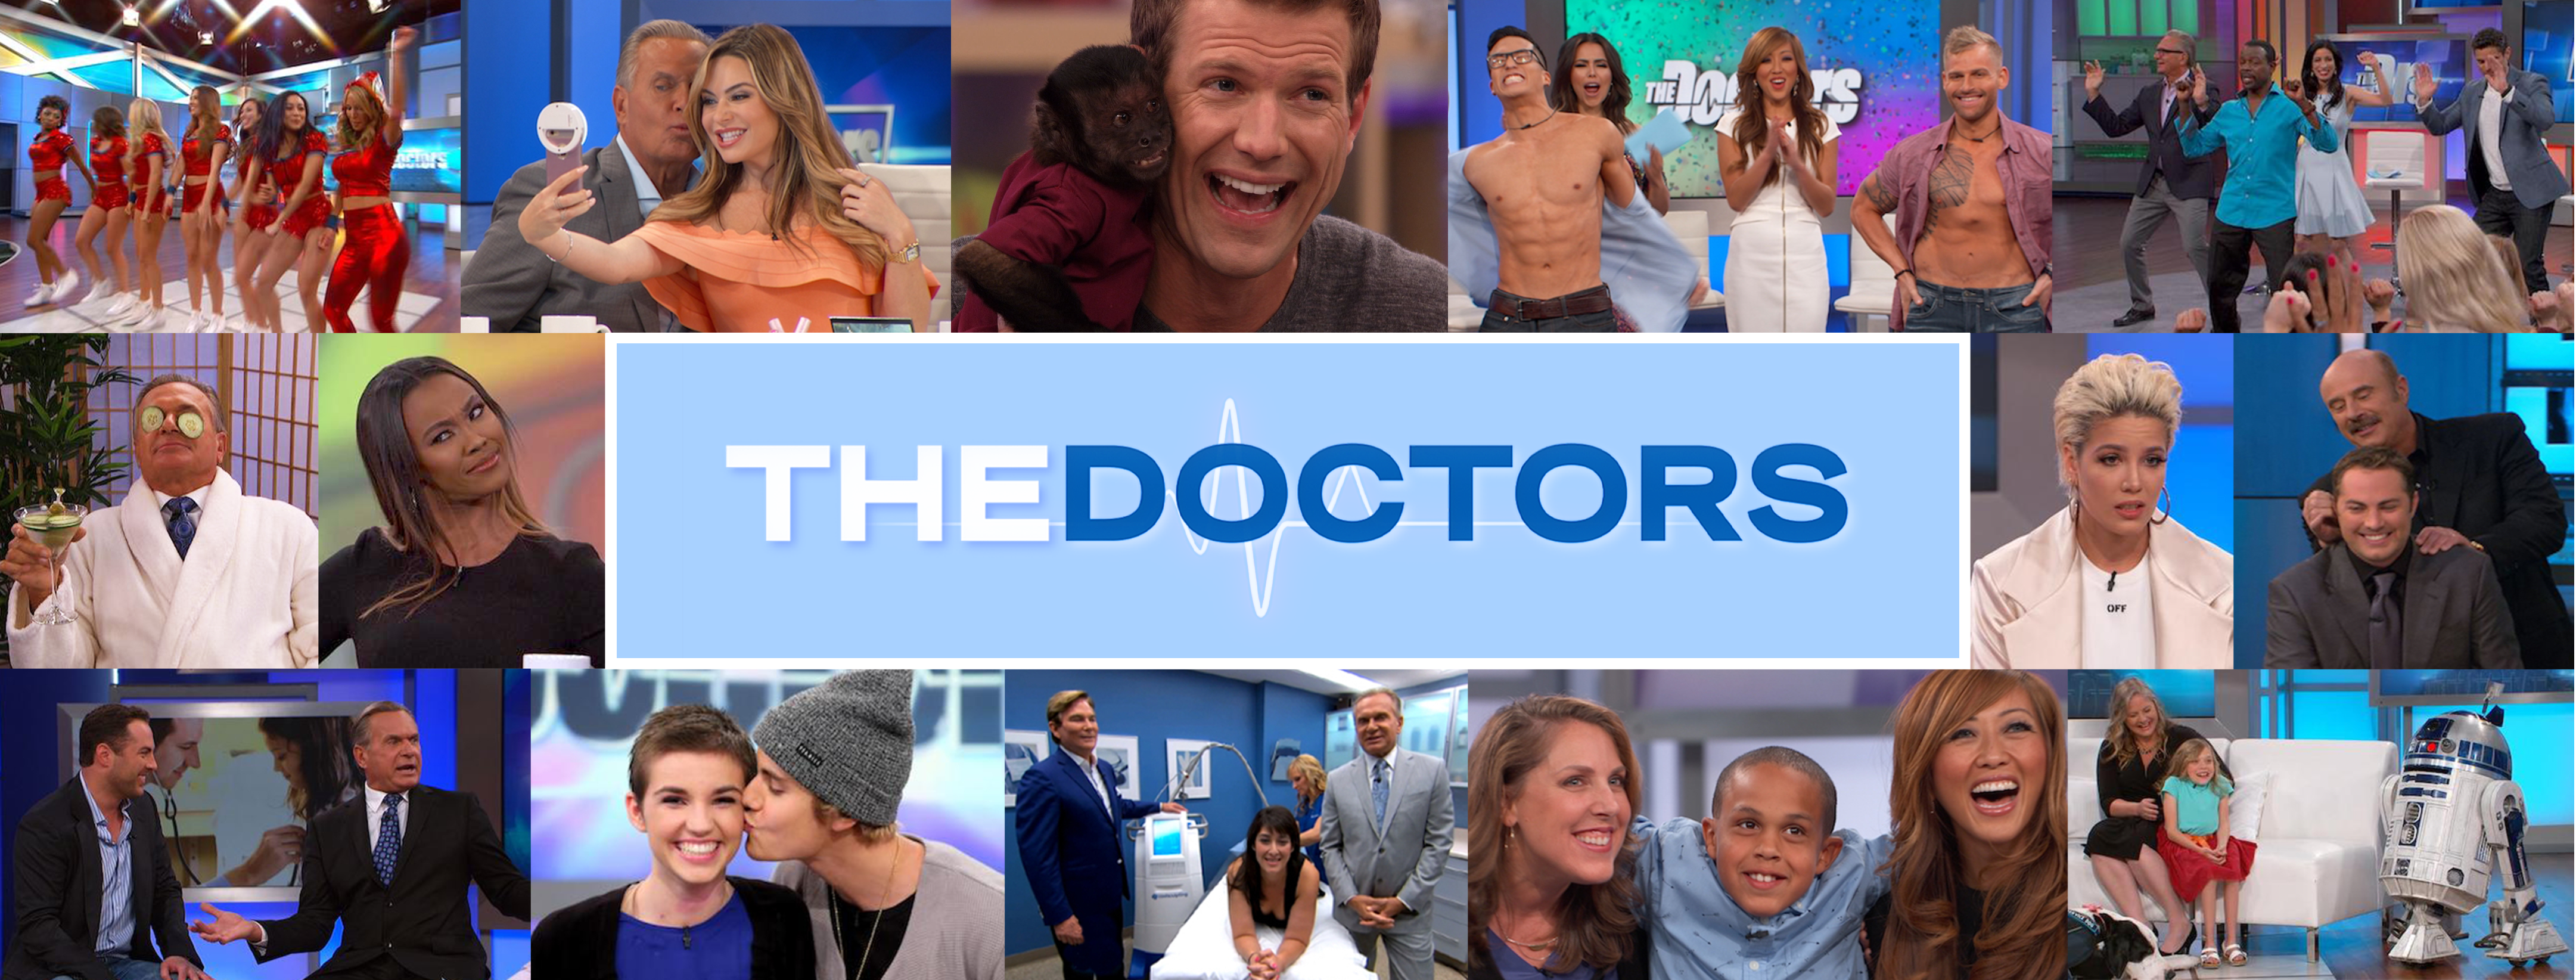 Chris on The Doctors